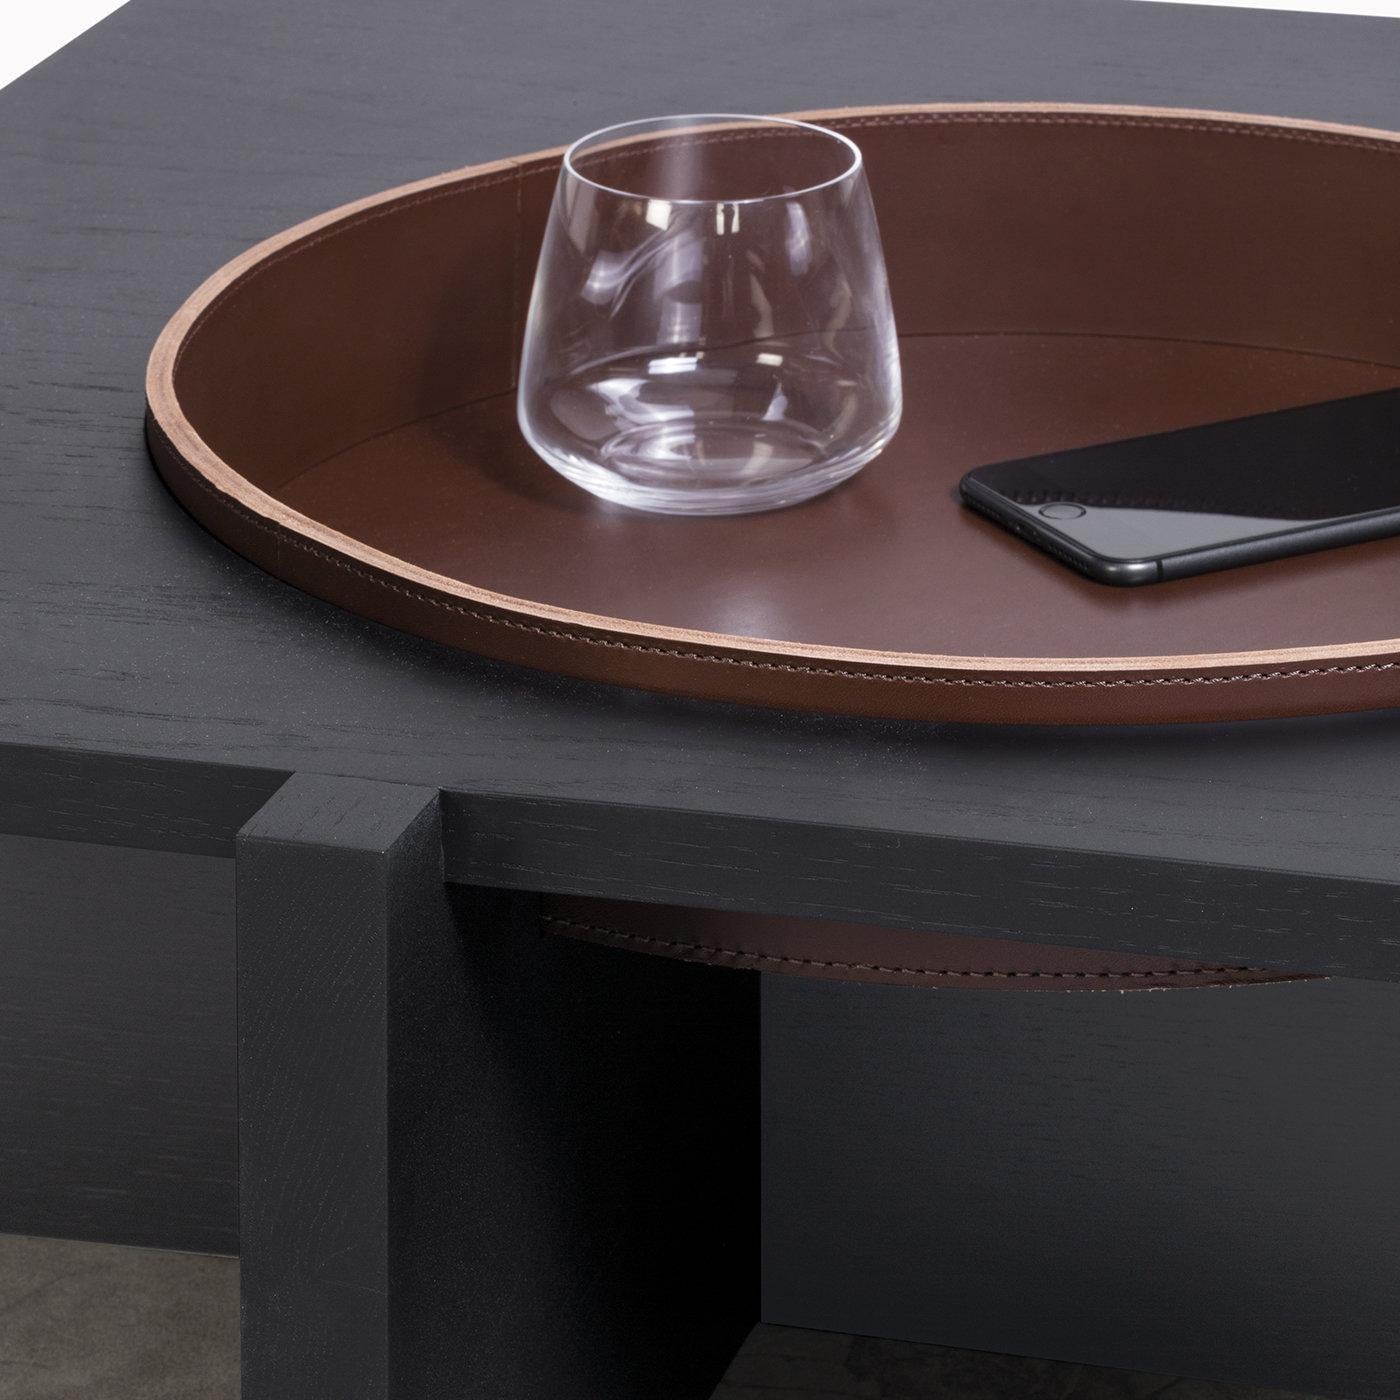 With its modern and contemporary design Yuga coffee table will enrich any environment. The structure is made by intersecting planes, which in this version are in wenge wood, complemented by a smooth saddle leather tray insert. All the saddle leather